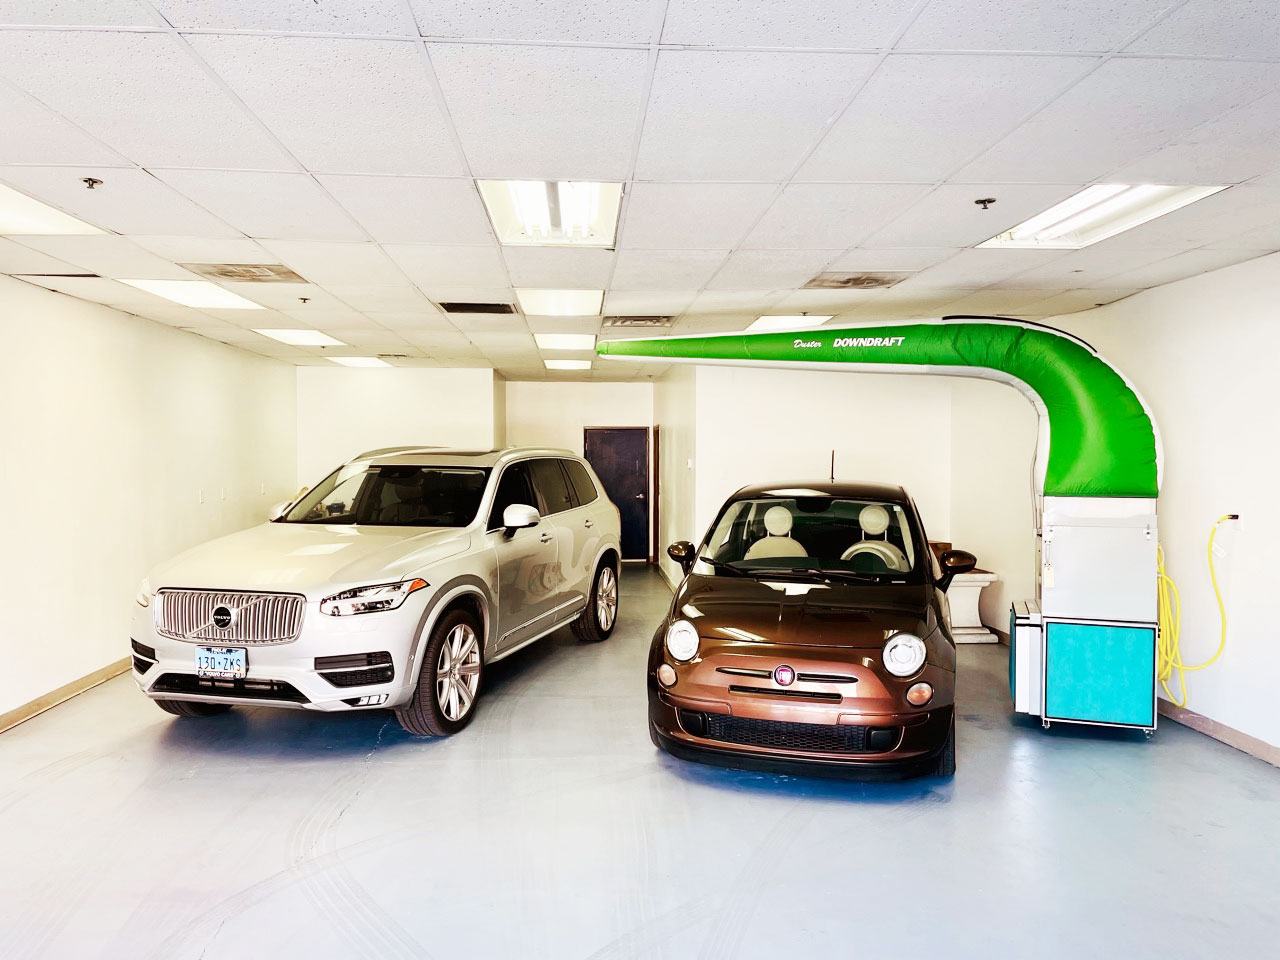 A shiny Volvo and a Fiat in brightly illuminated showroom at the RestorFX Las Vegas center